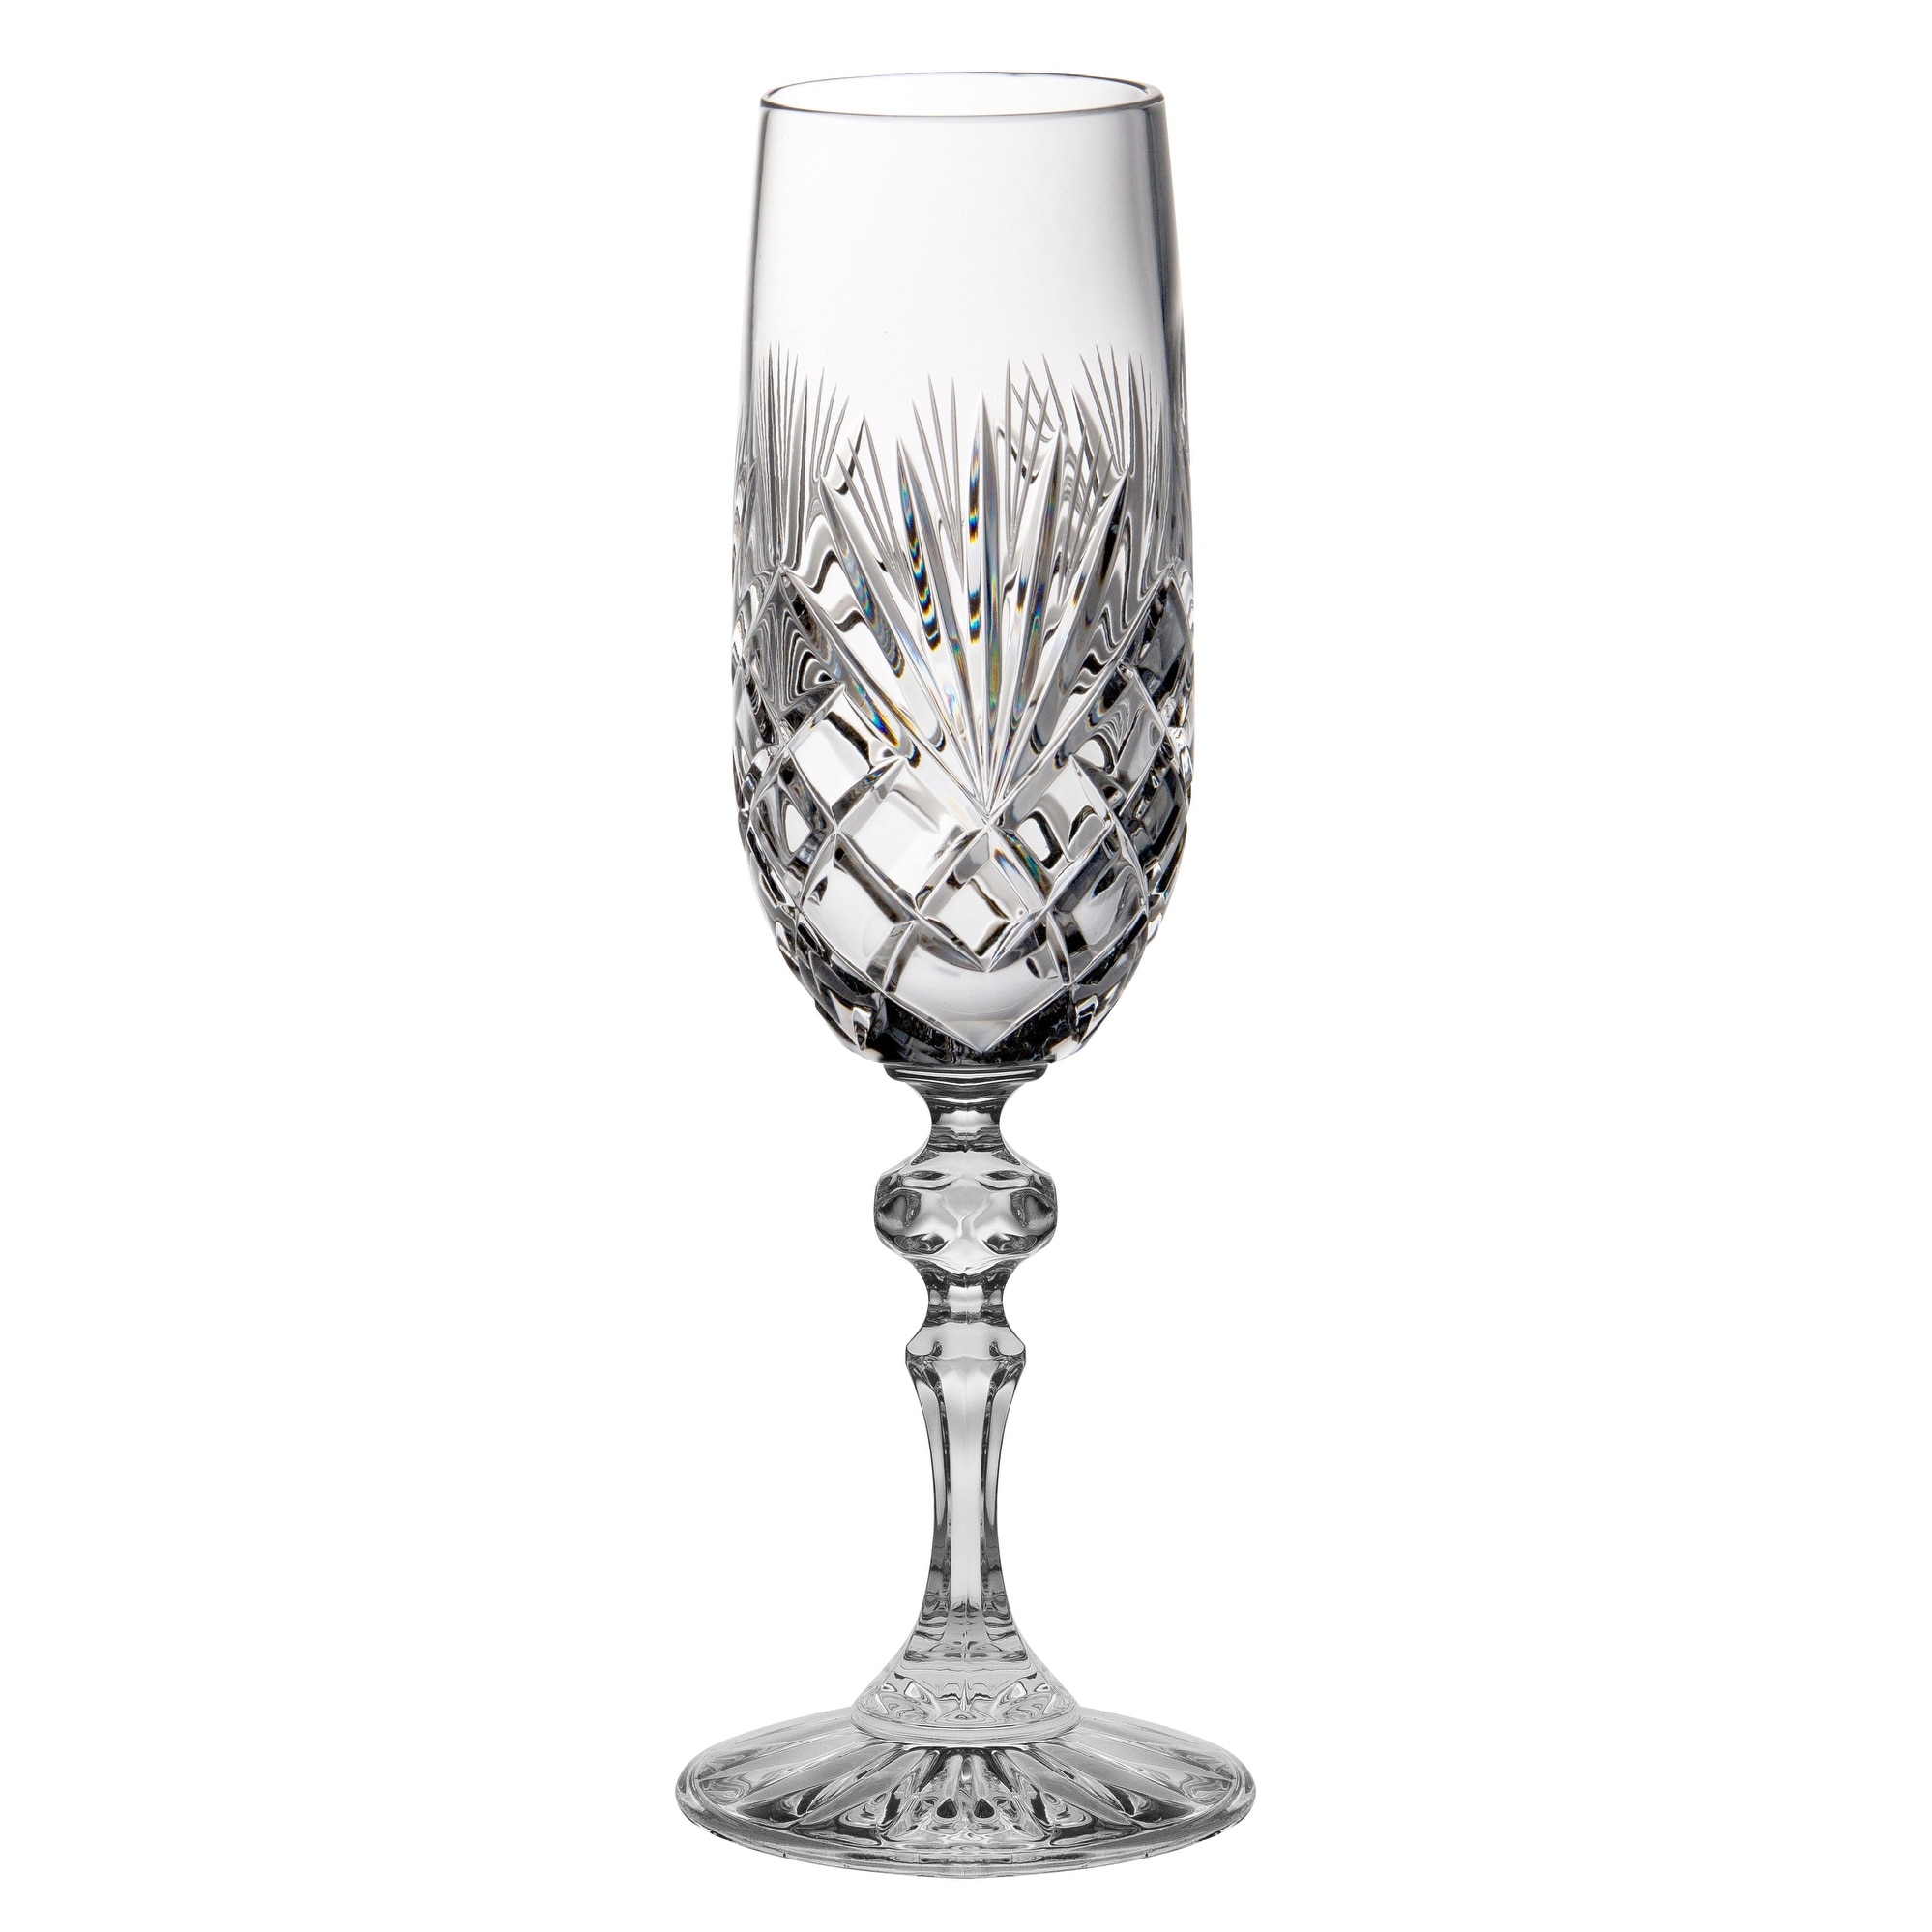 https://ak1.ostkcdn.com/images/products/is/images/direct/e3203852384bc51594872970b56aeb0864b80d9e/Majestic-Gifts-Inc.-Crystal-Wedding-Champagne-Flute-Glasses-6oz%2C-Set-6.jpg